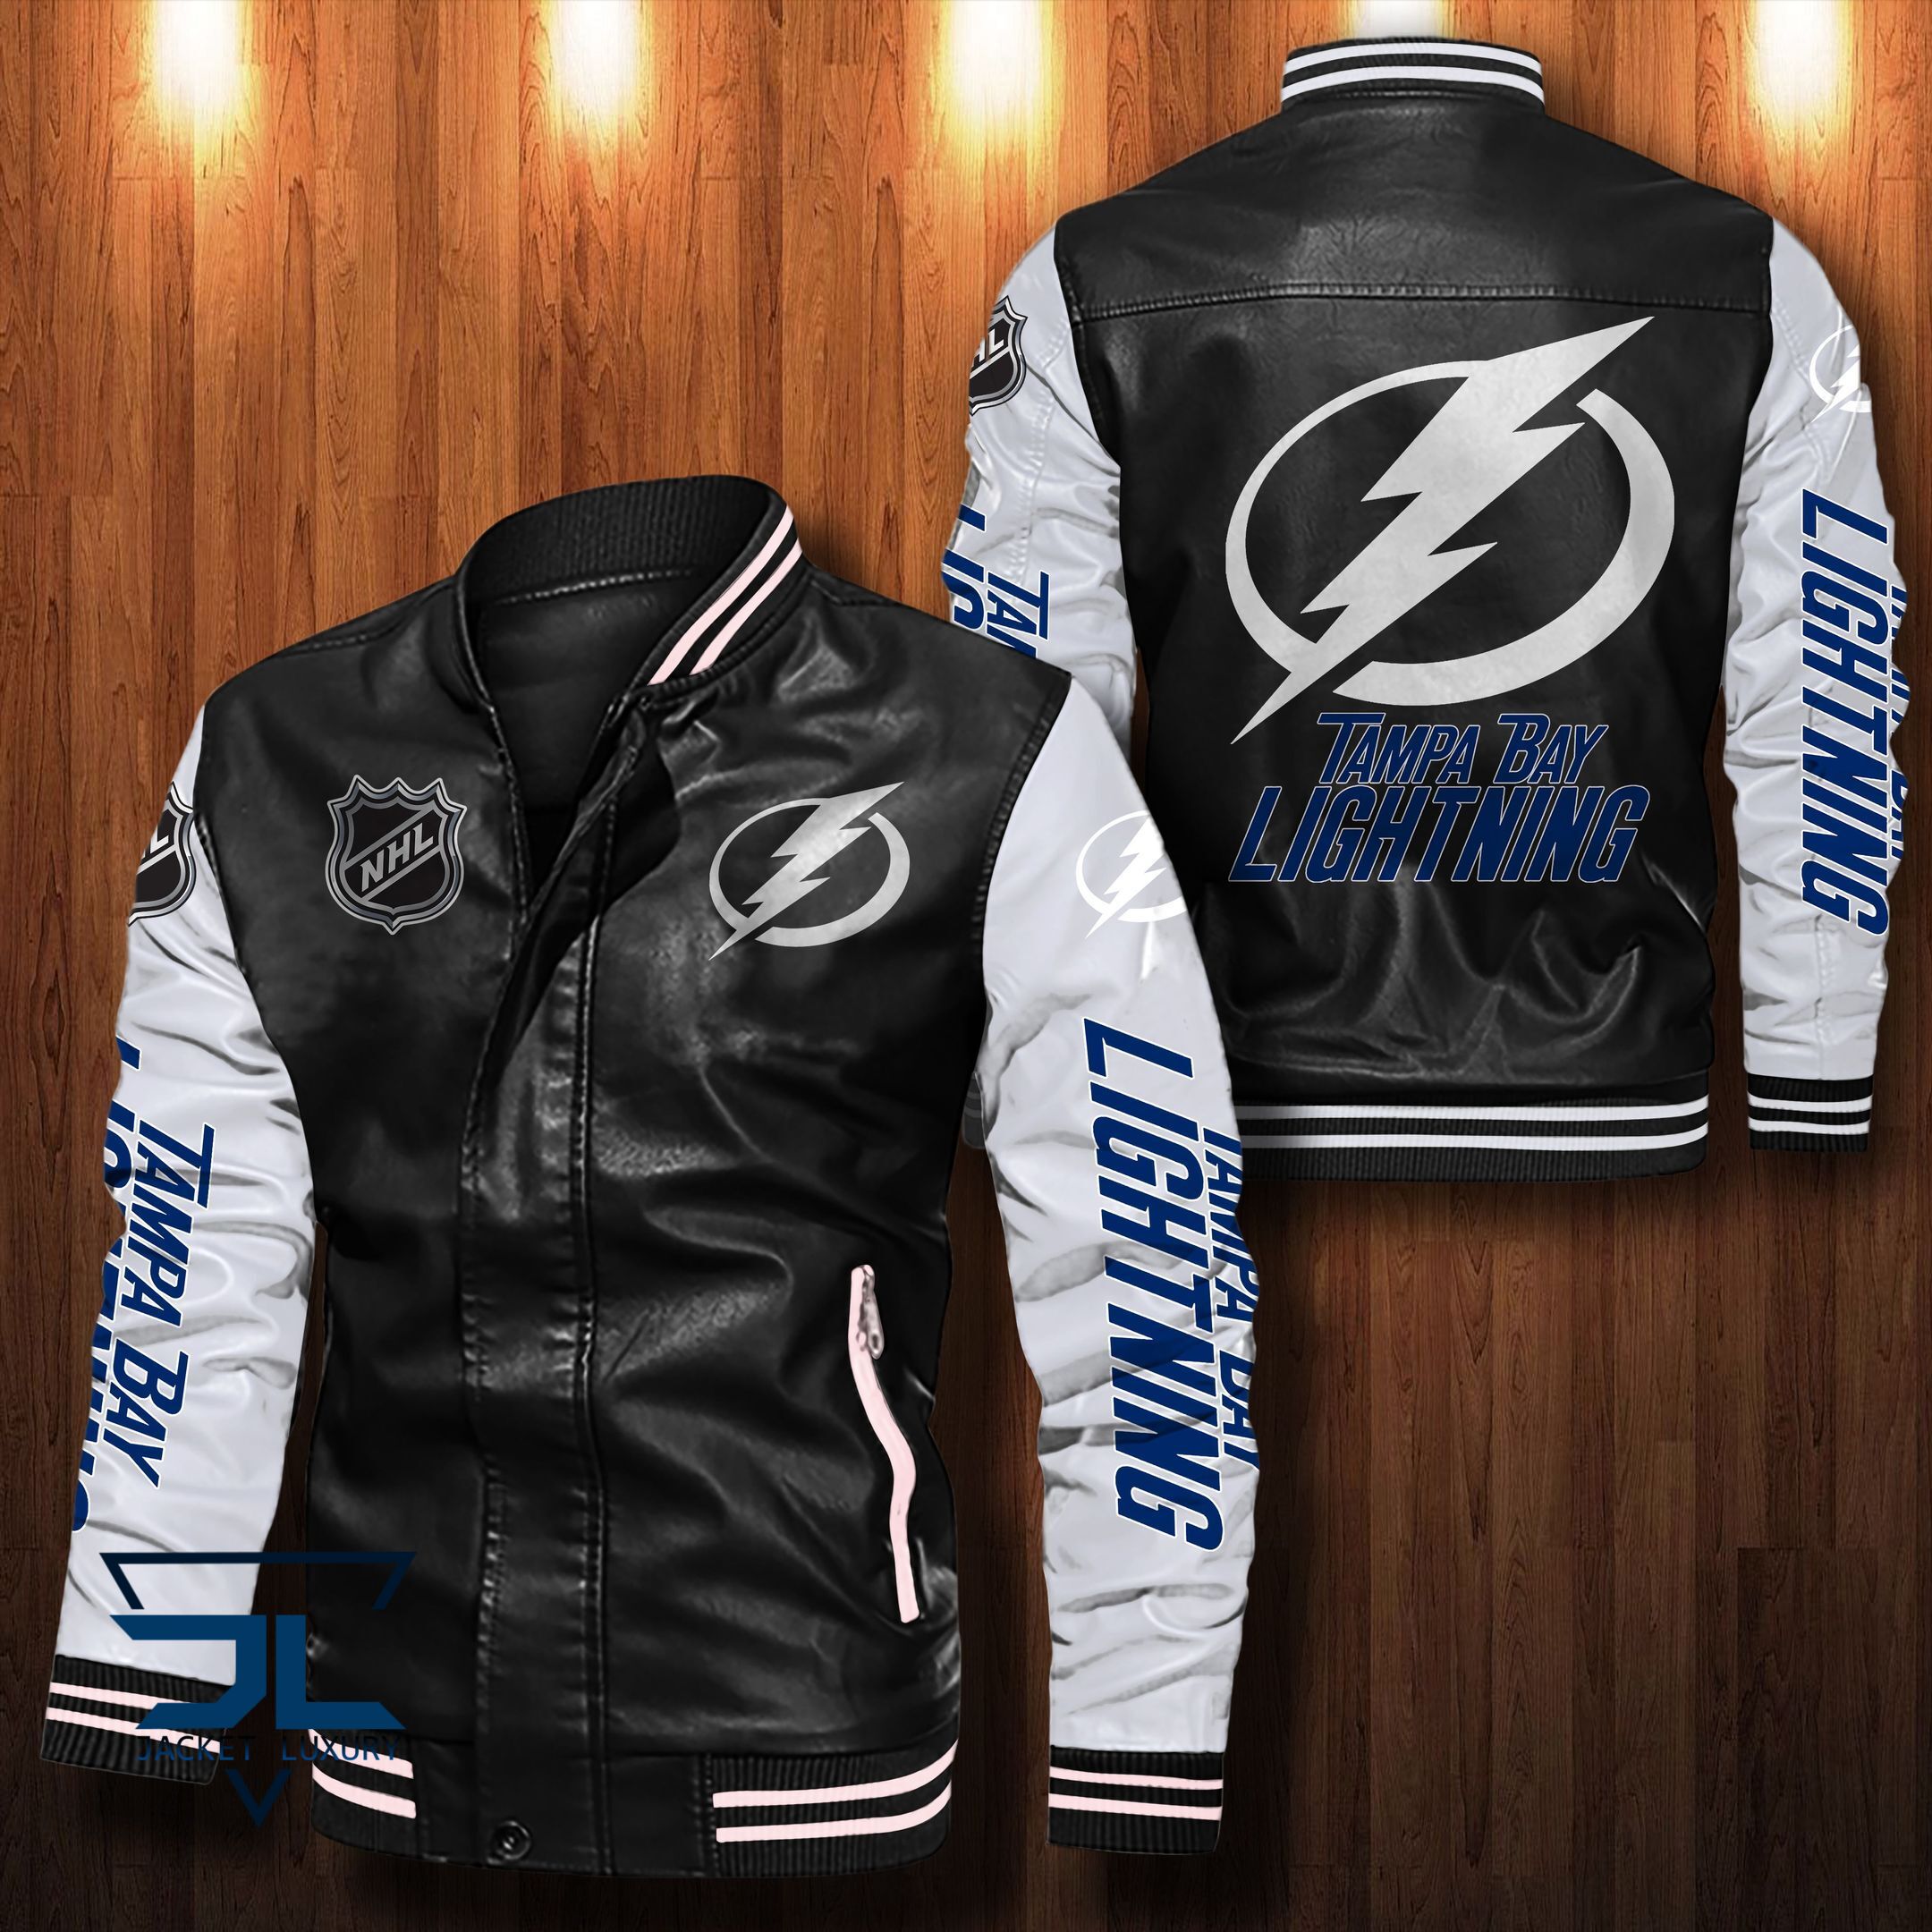 HOT Jacket only $69,99 so don't miss out - Be sure to pick up yours today! 161